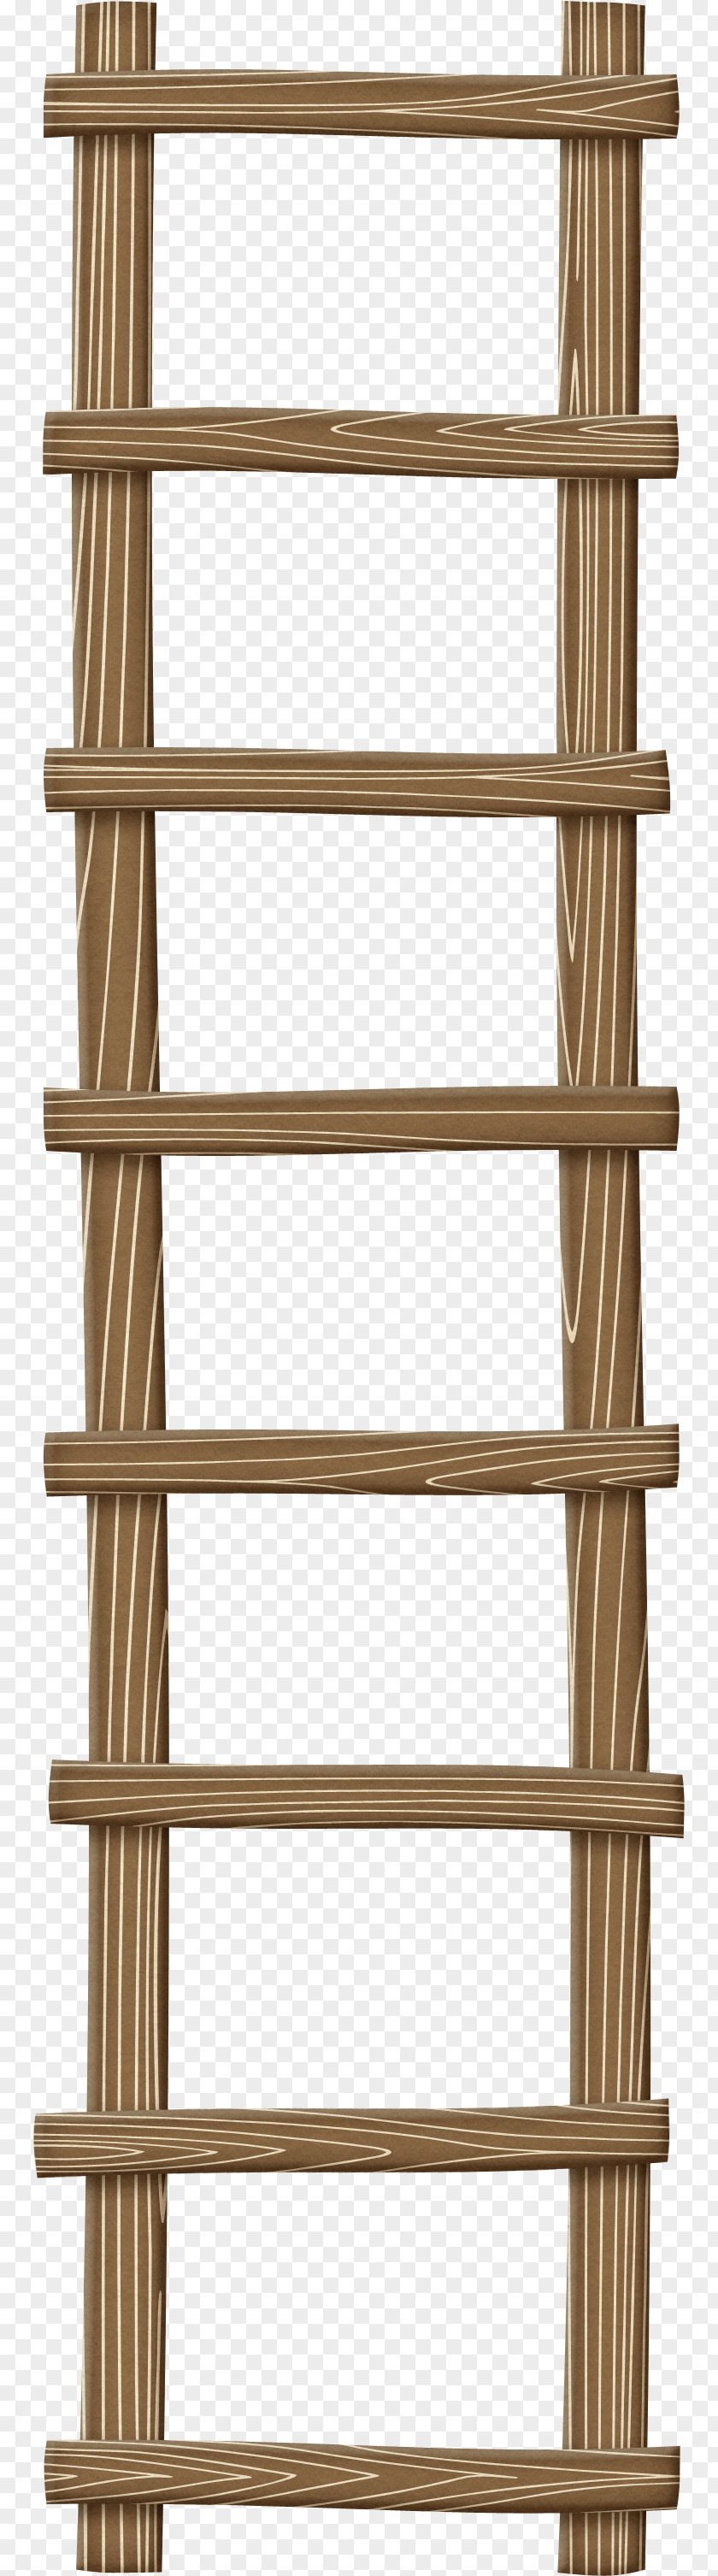 Wood Ladder Stairs Stair Riser Icon PNG